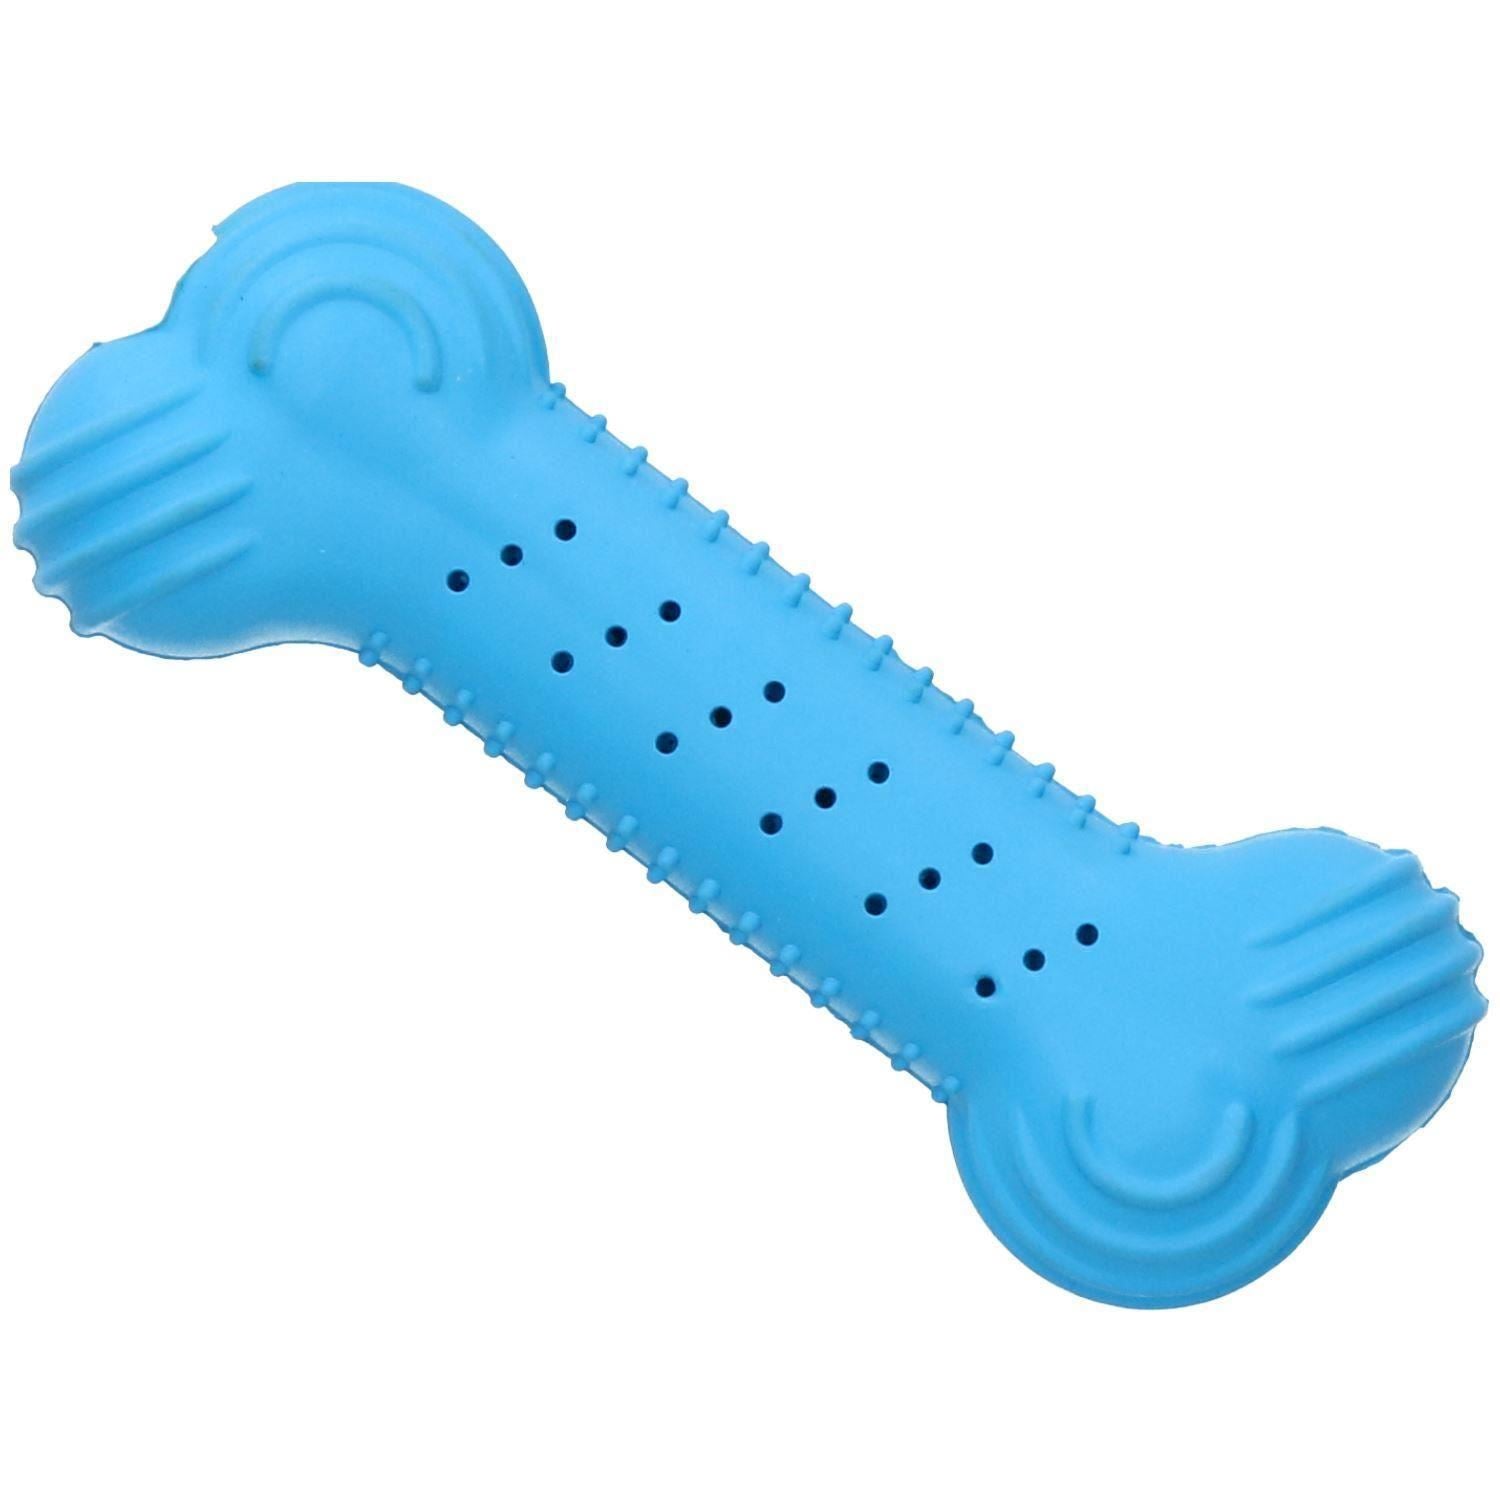 Chillout Cool Soak Dog Toy Heat Relief Puppy Teething Play Time